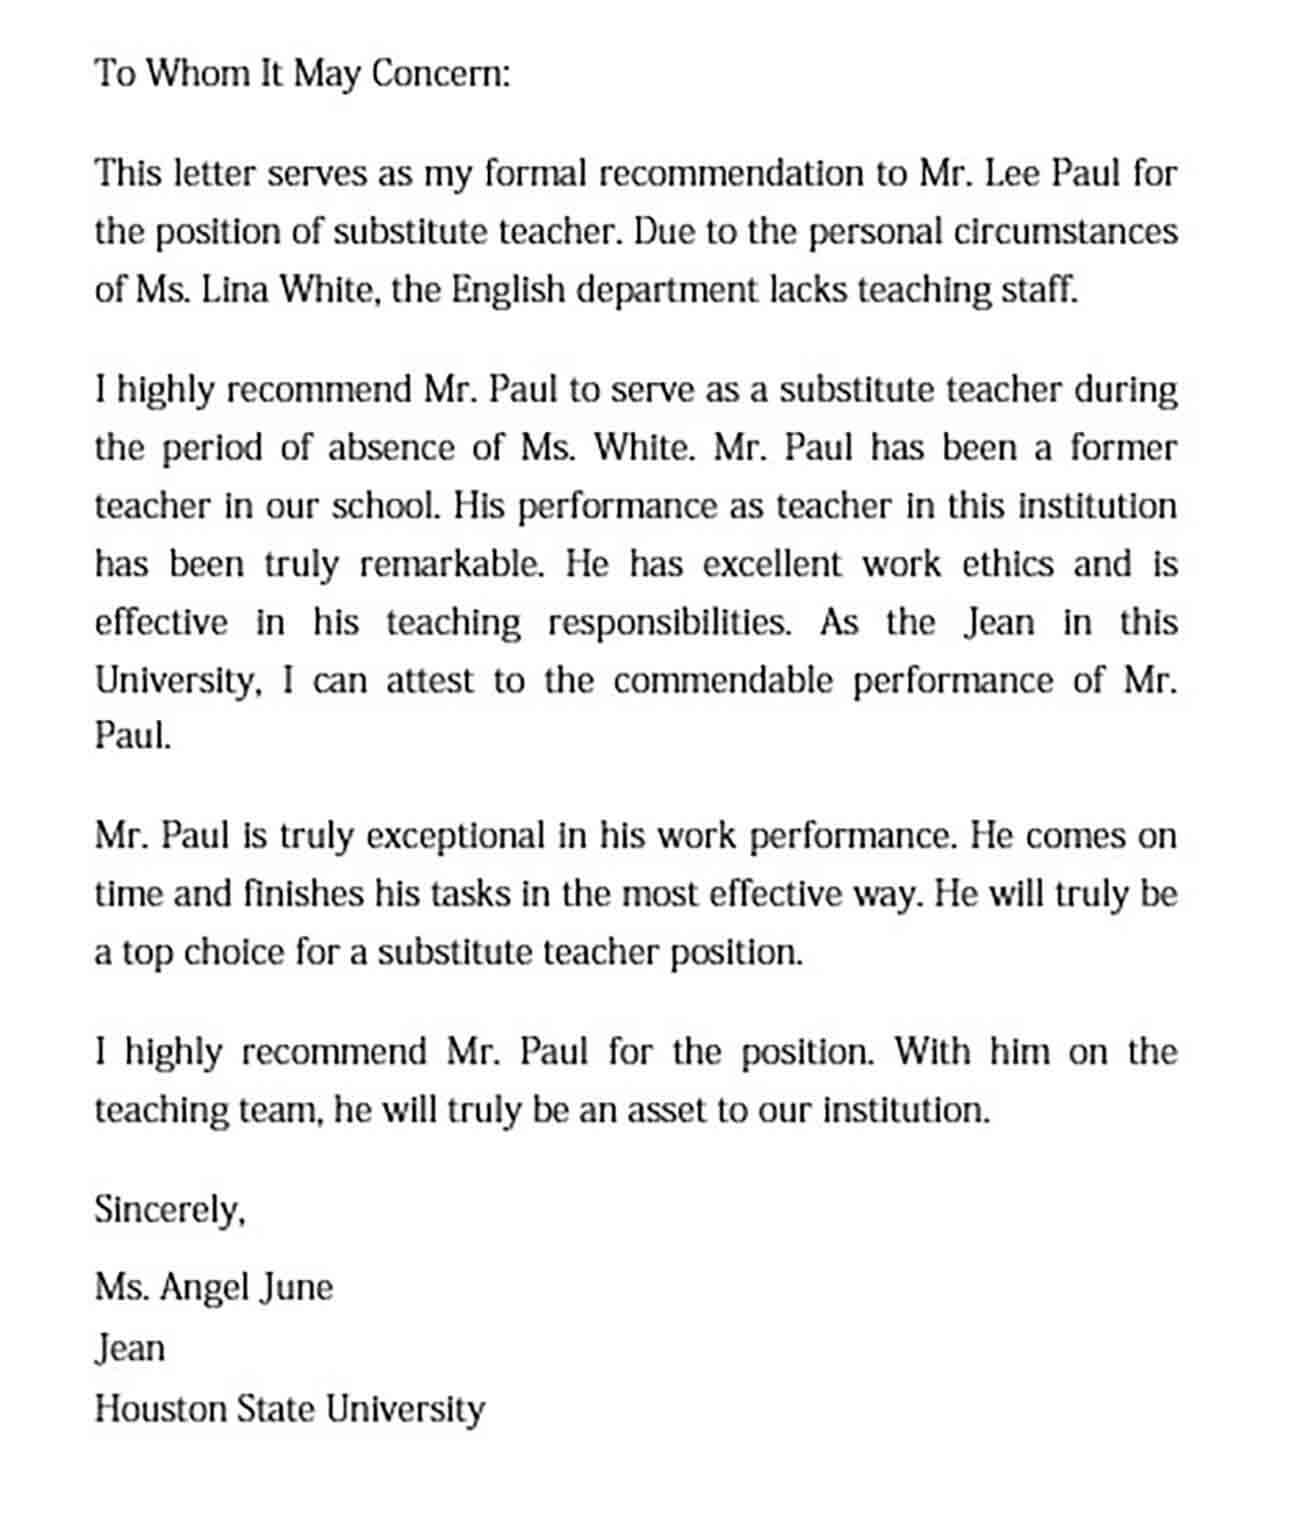 Substitute Letter of Recommendation for a Teacher